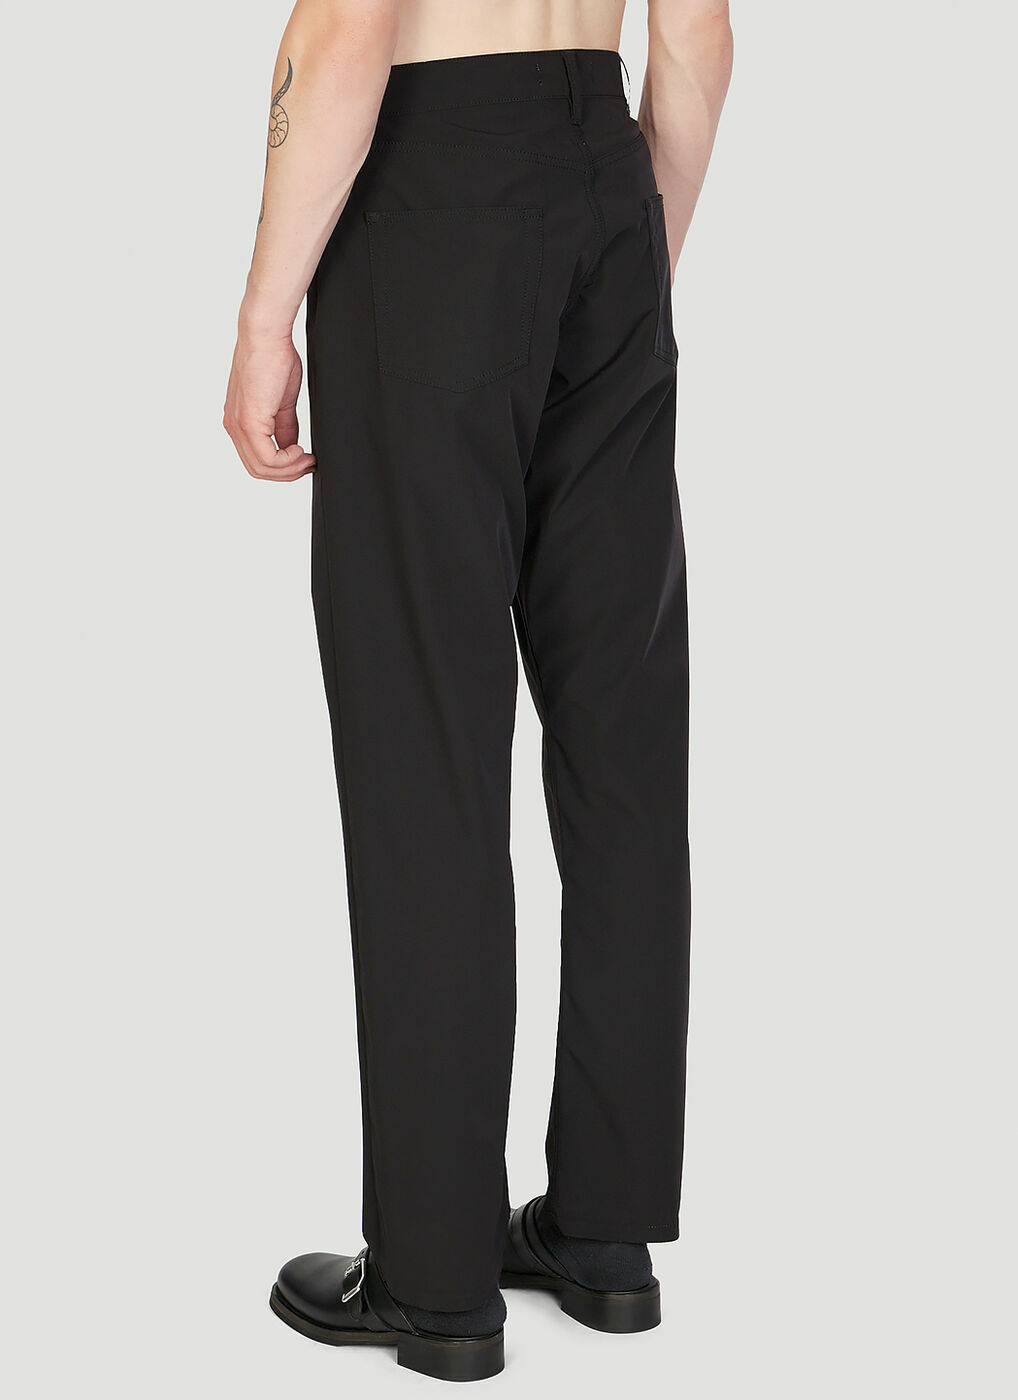 Our Legacy - Formal Cut Pants in Black Our Legacy